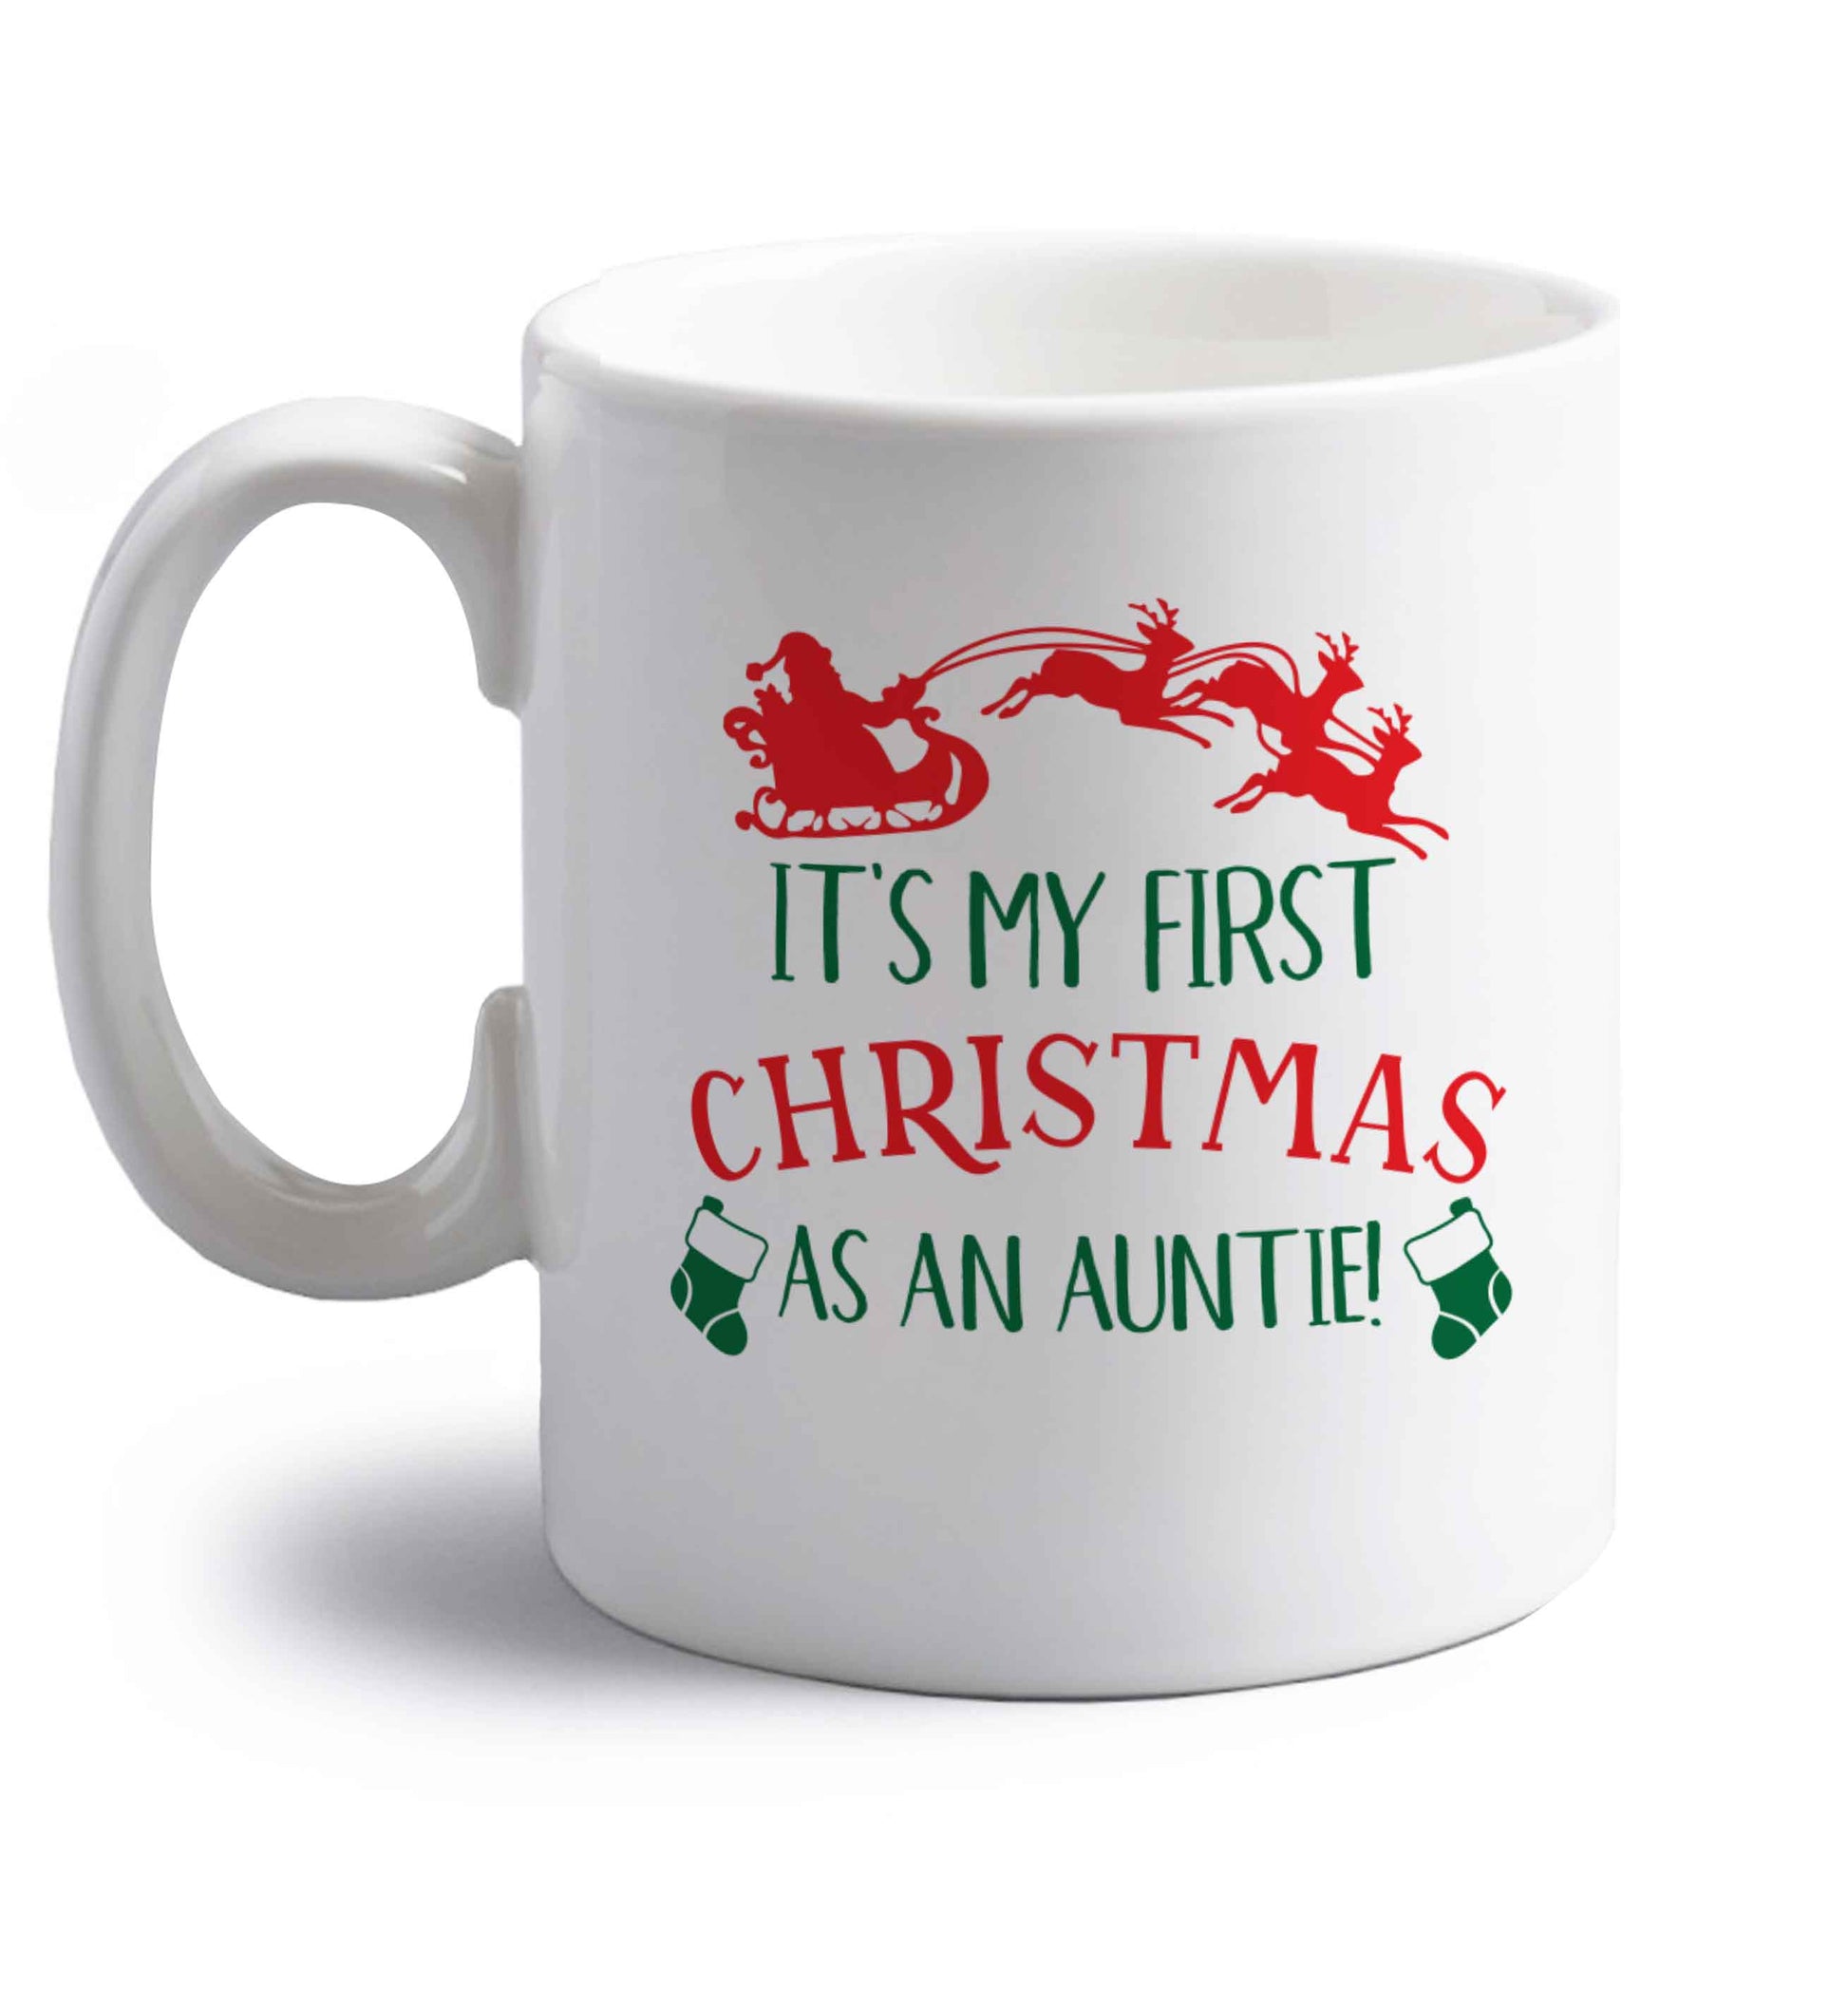 It's my first Christmas as an auntie! right handed white ceramic mug 